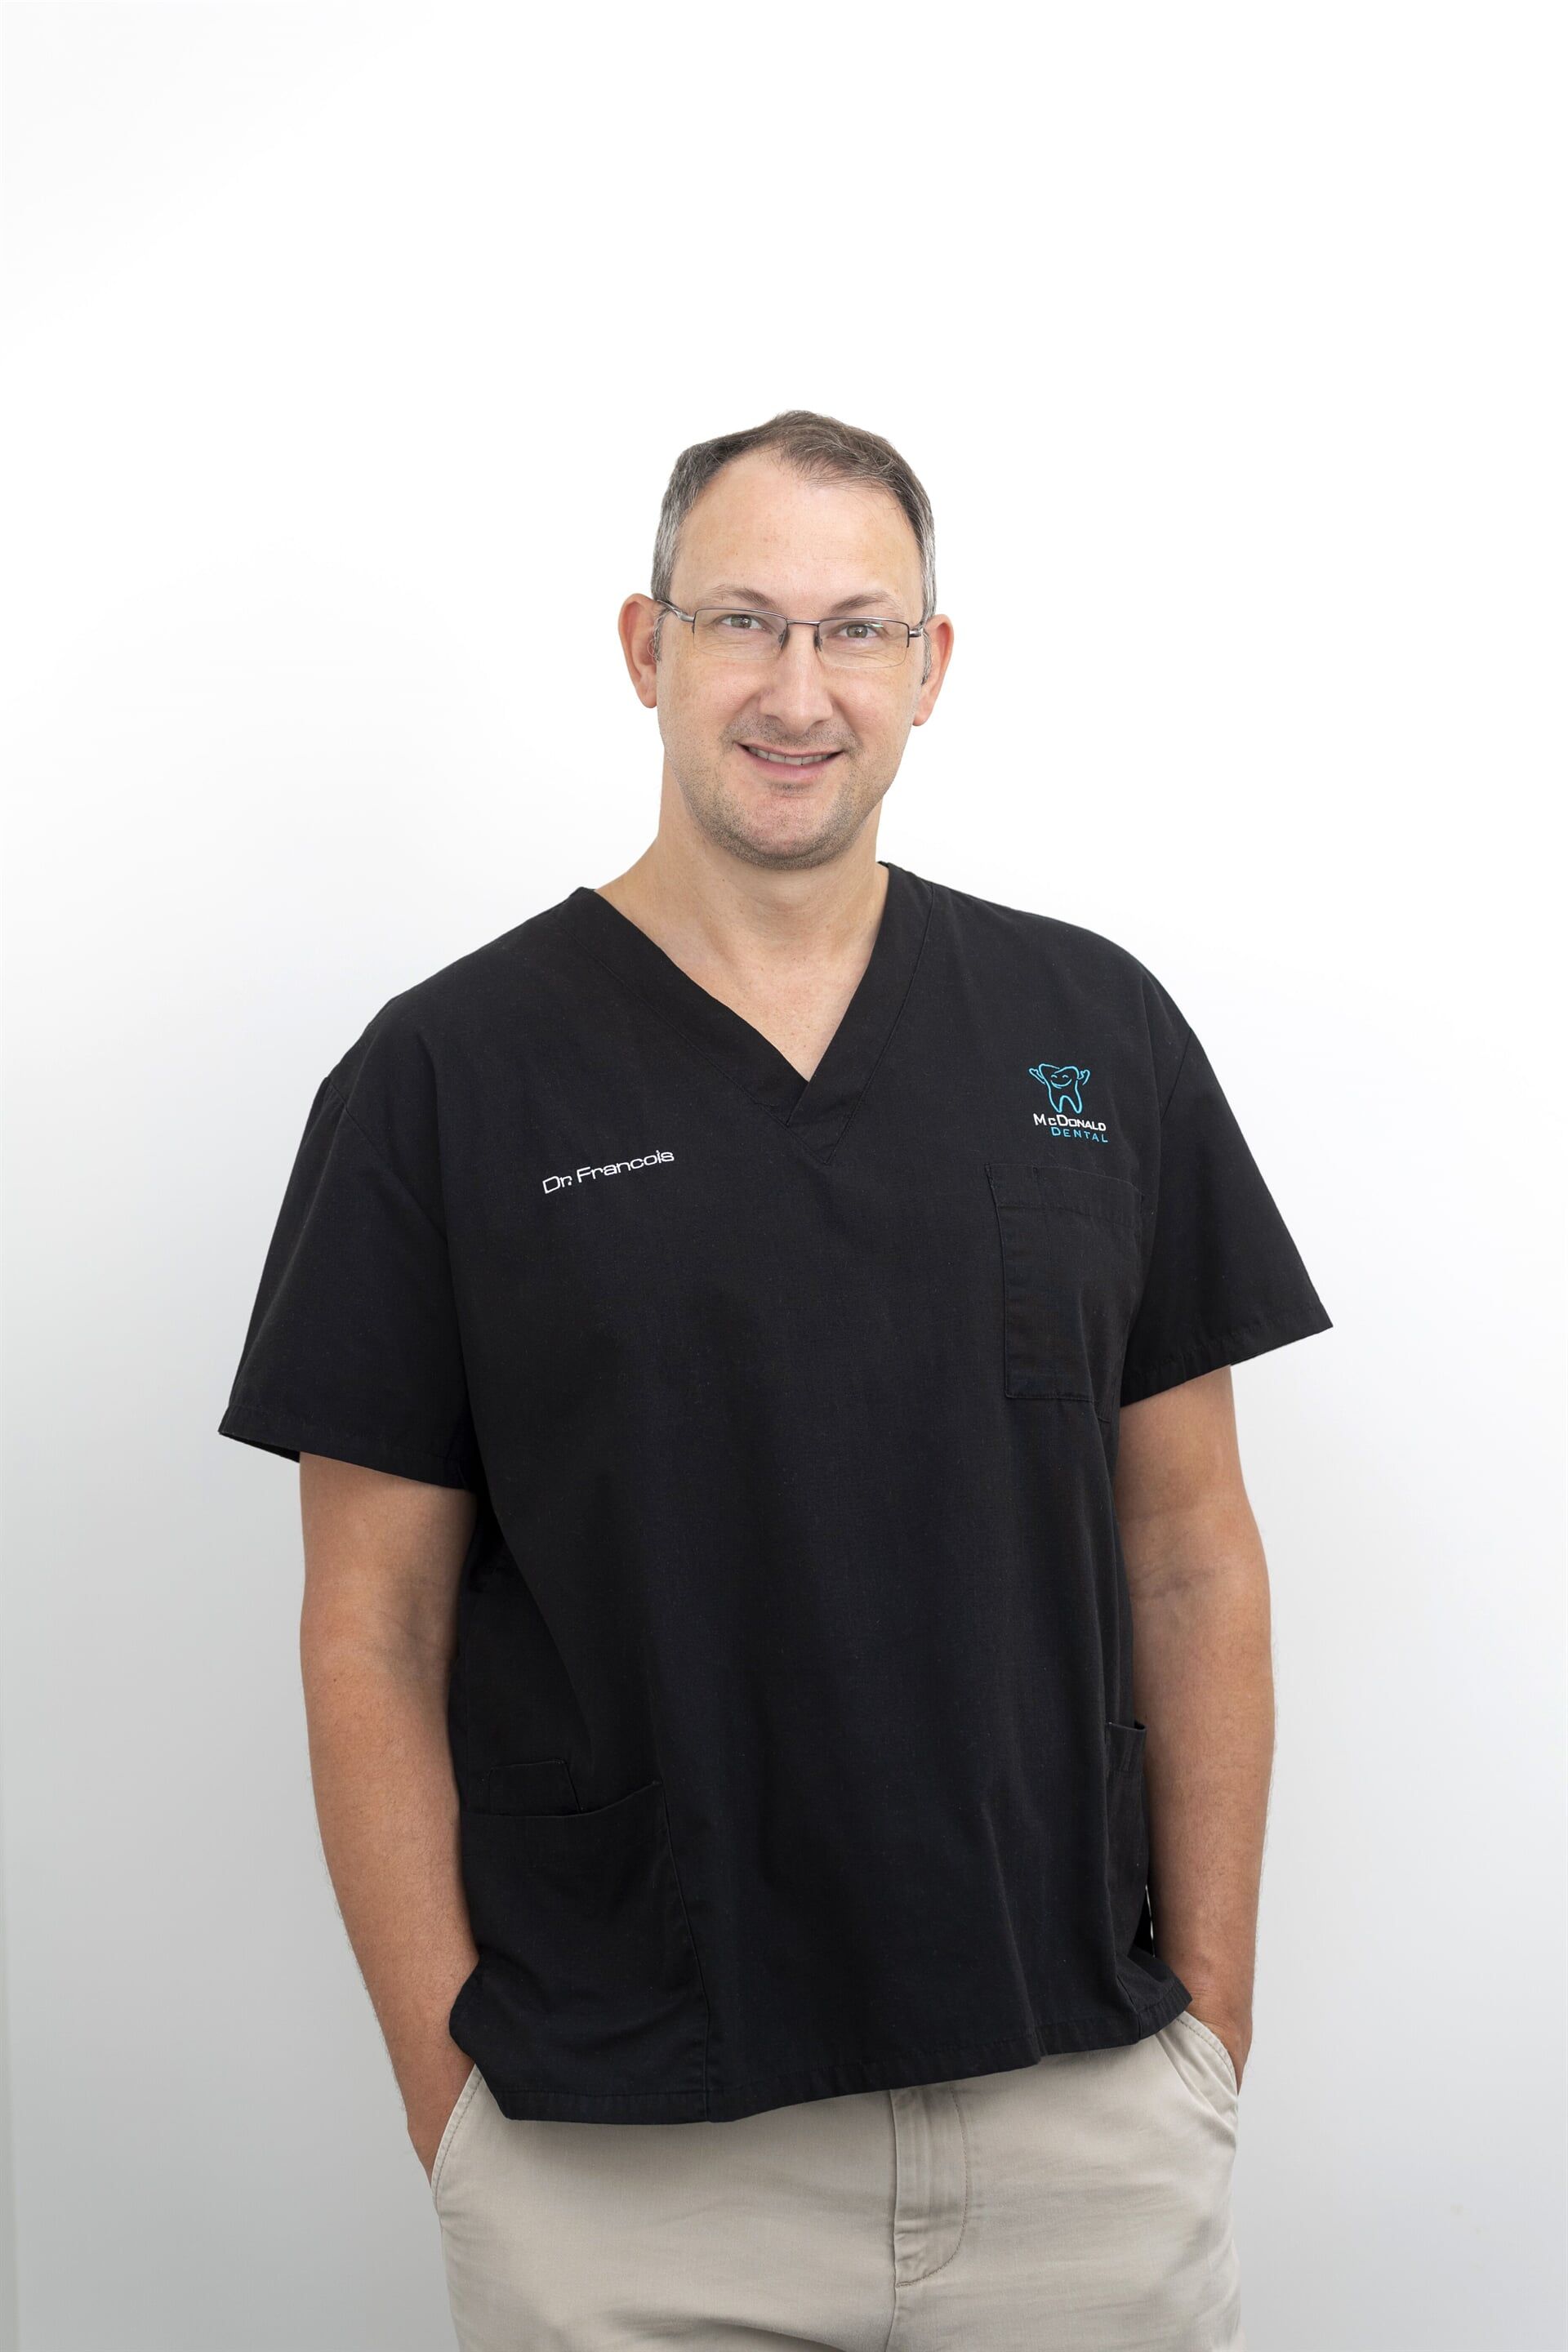 Dr Francois McDonald — Dental Services in Gympie, QLD